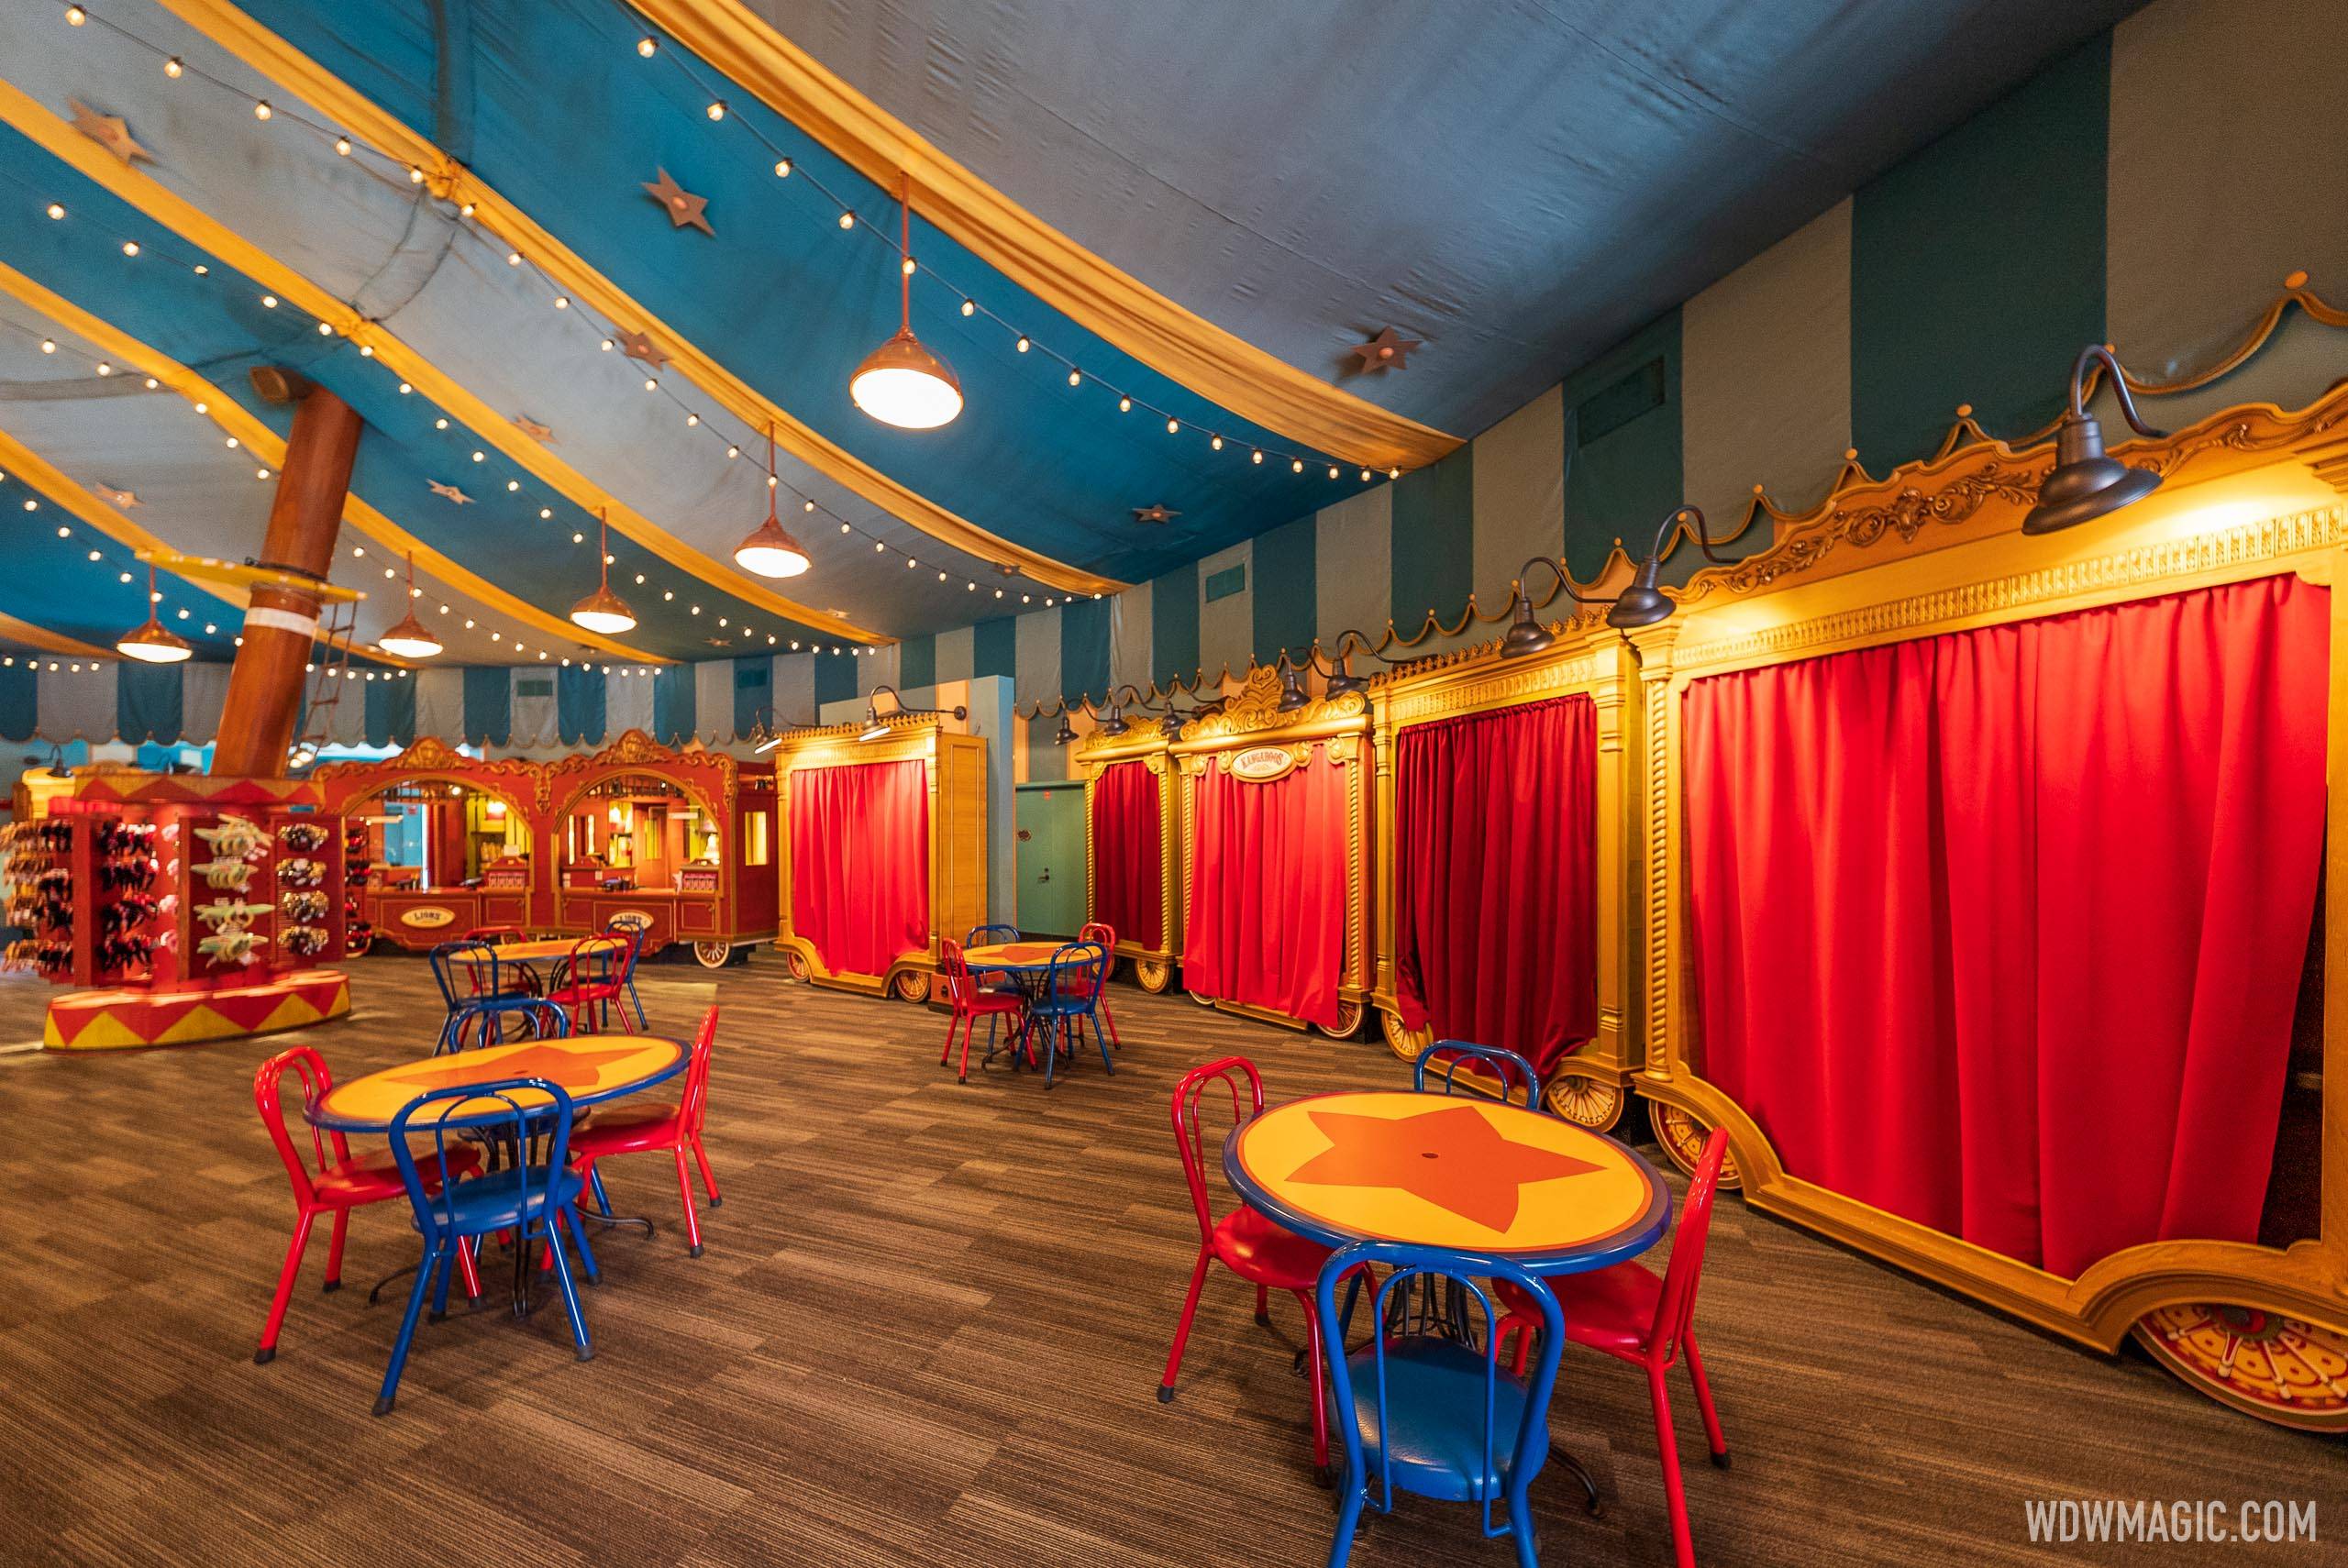 Big Top Souvenirs reopening August 2021